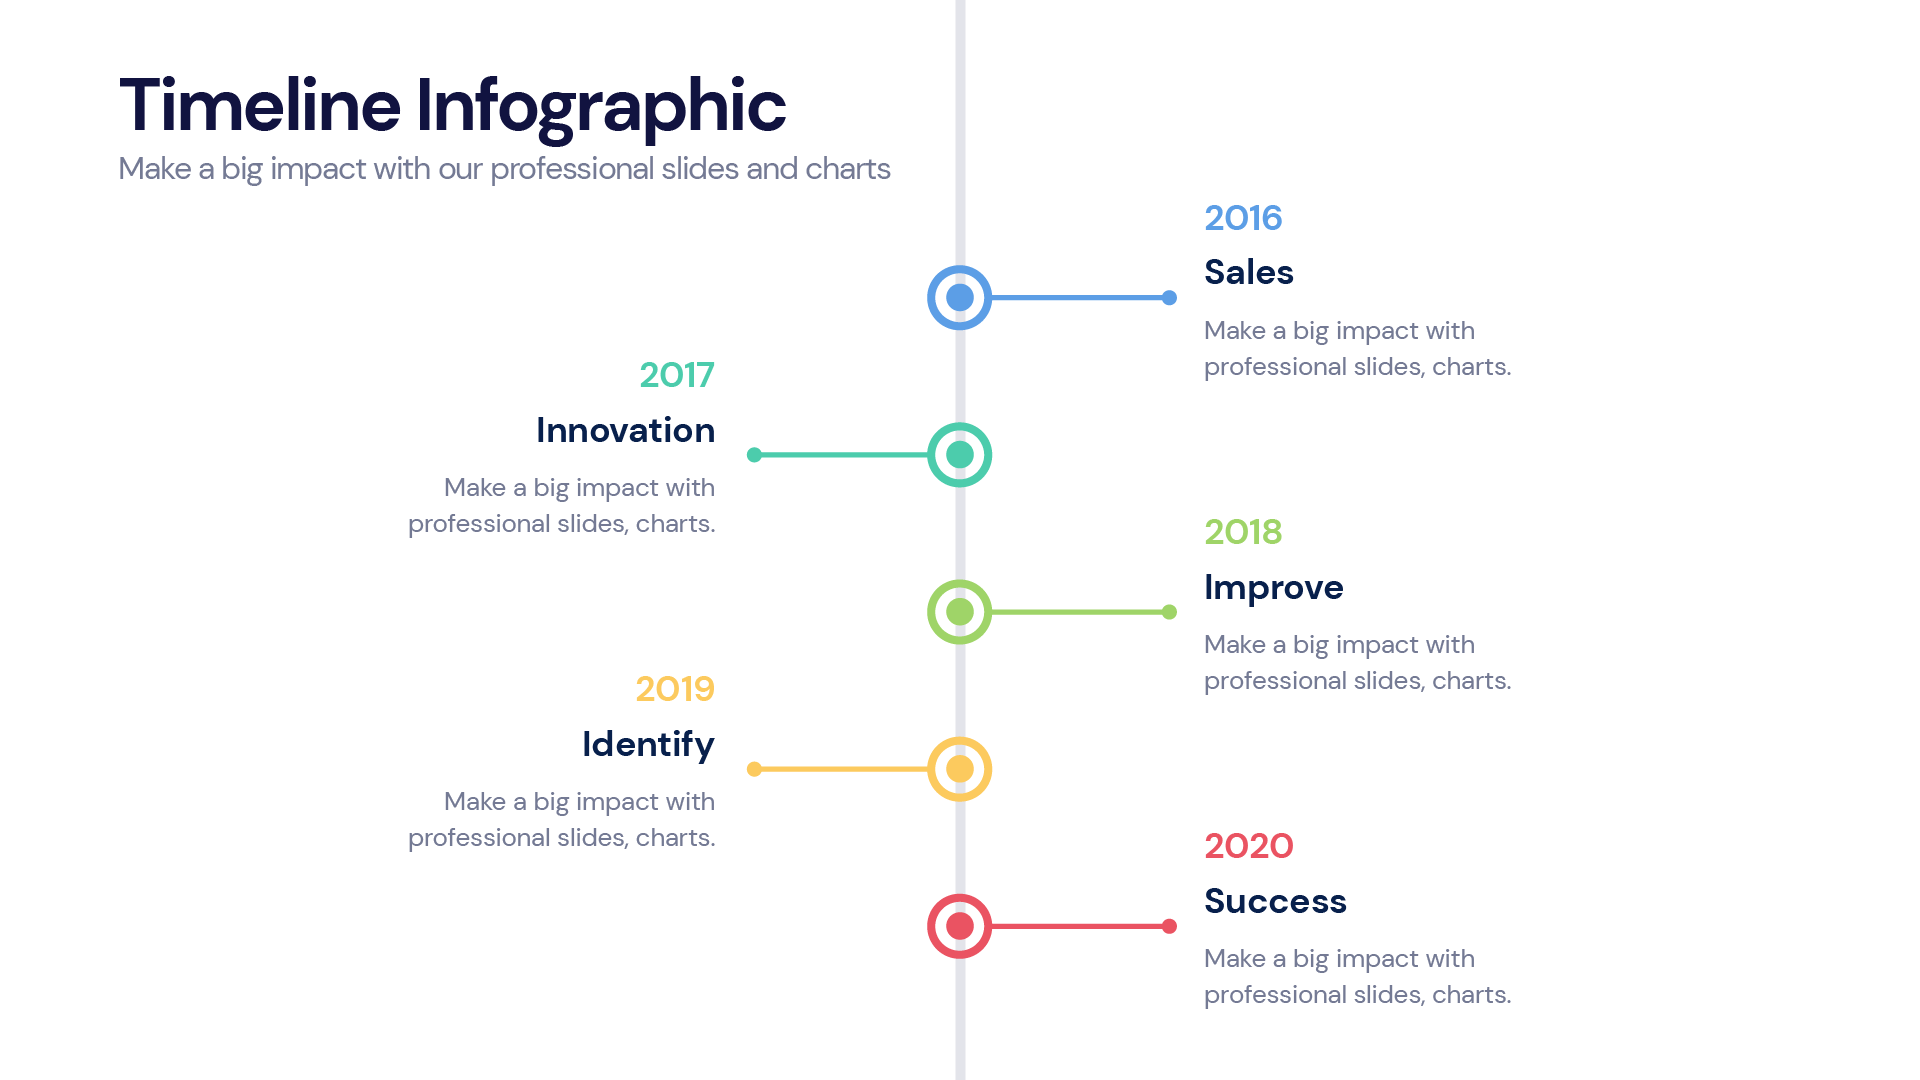 Timeline Infographic templates